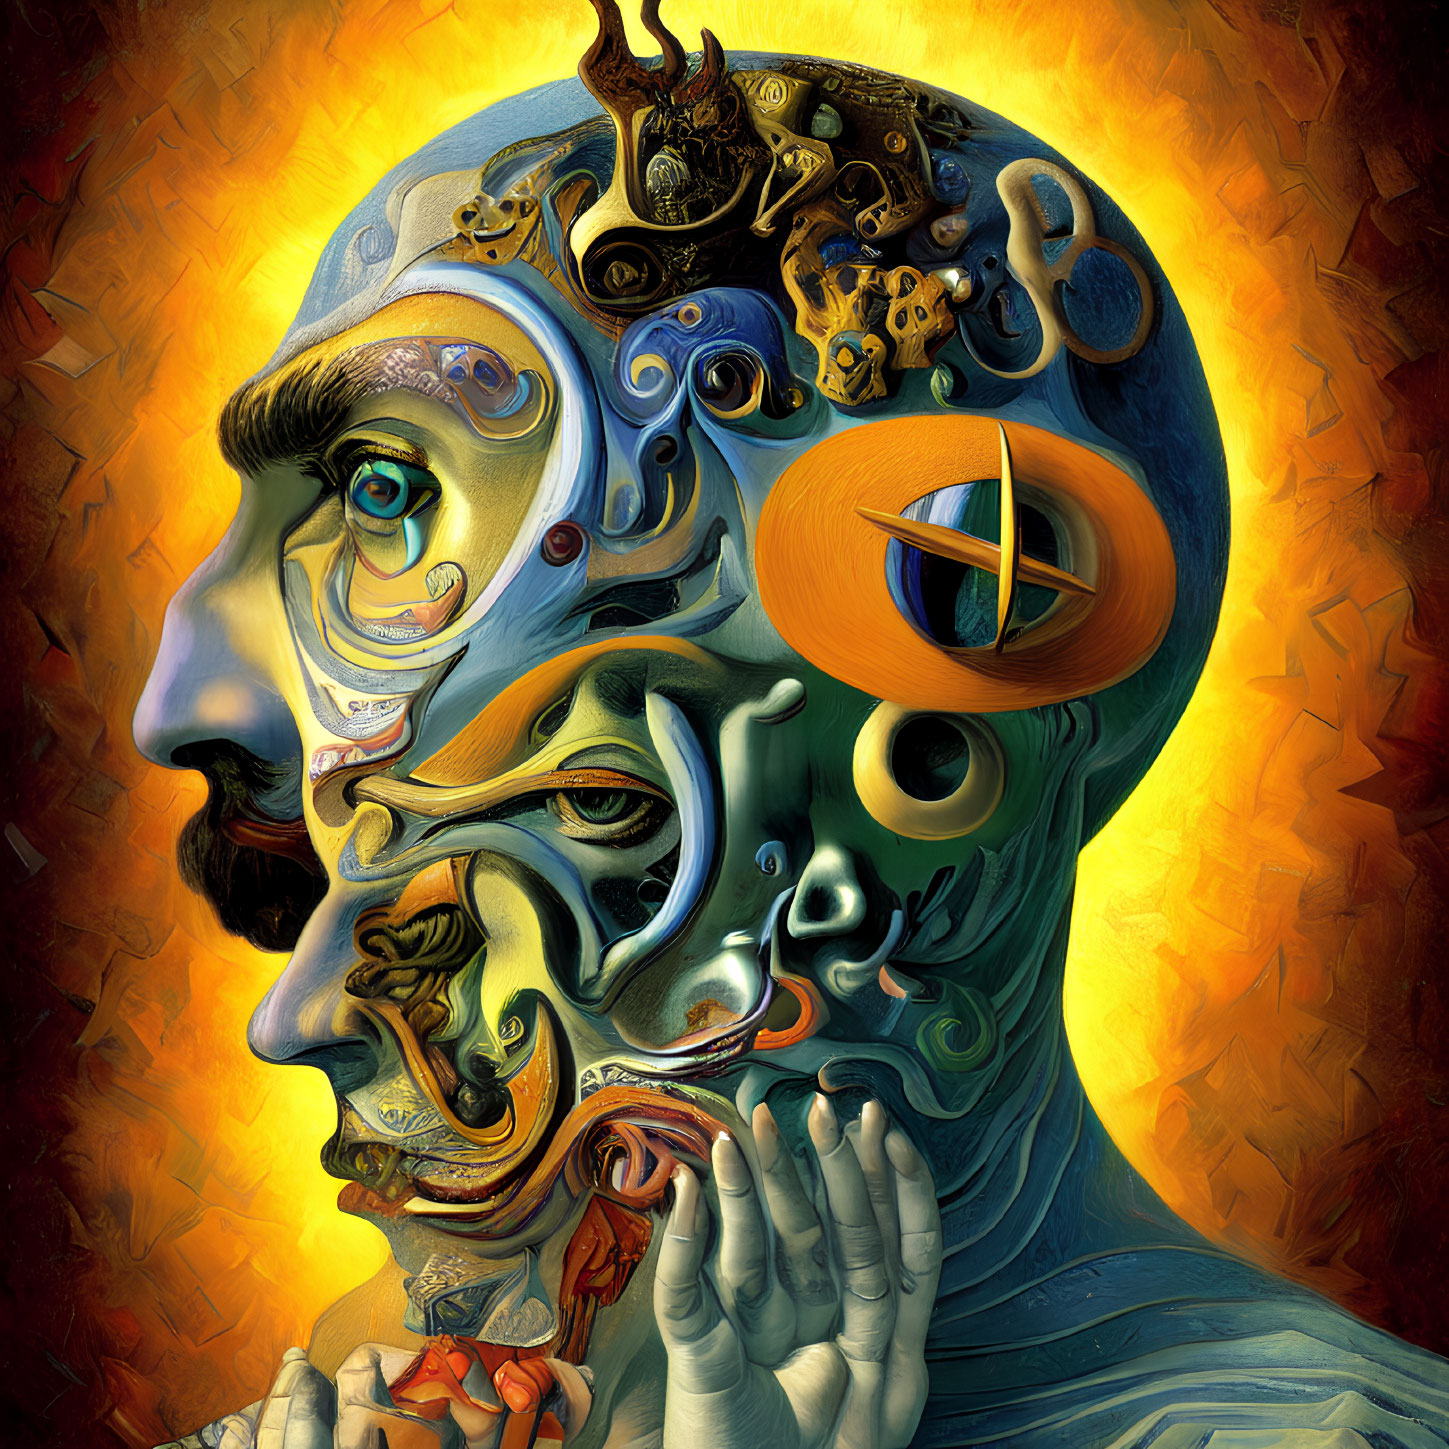 Colorful surreal artwork: Multifaceted head with mechanical elements on fiery backdrop